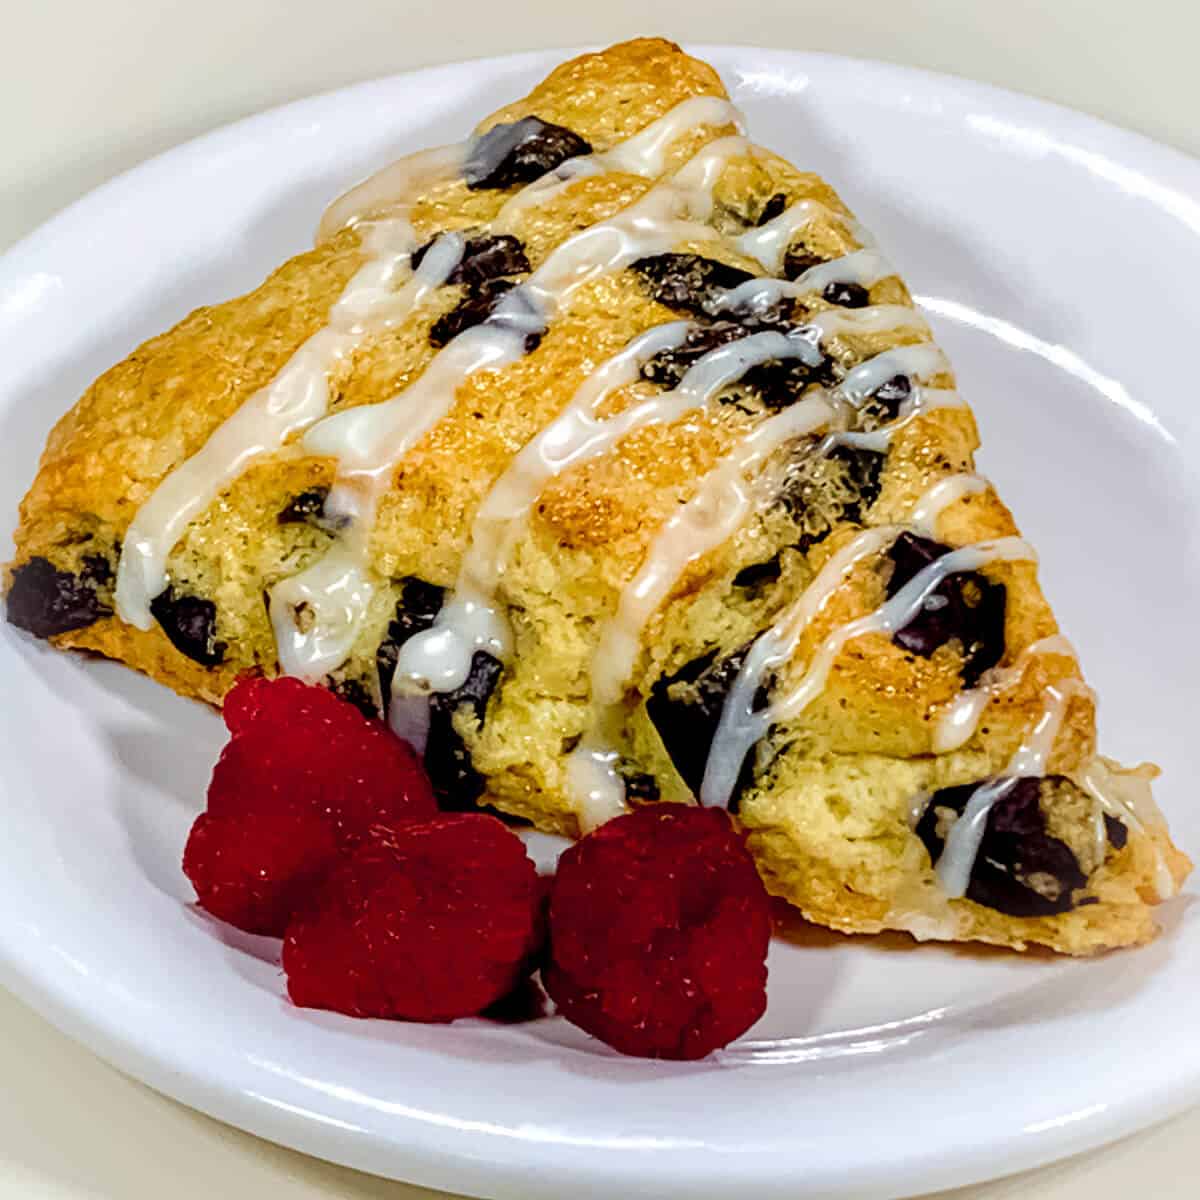 Mint chocolate chunk scone on a white plate with raspberries.